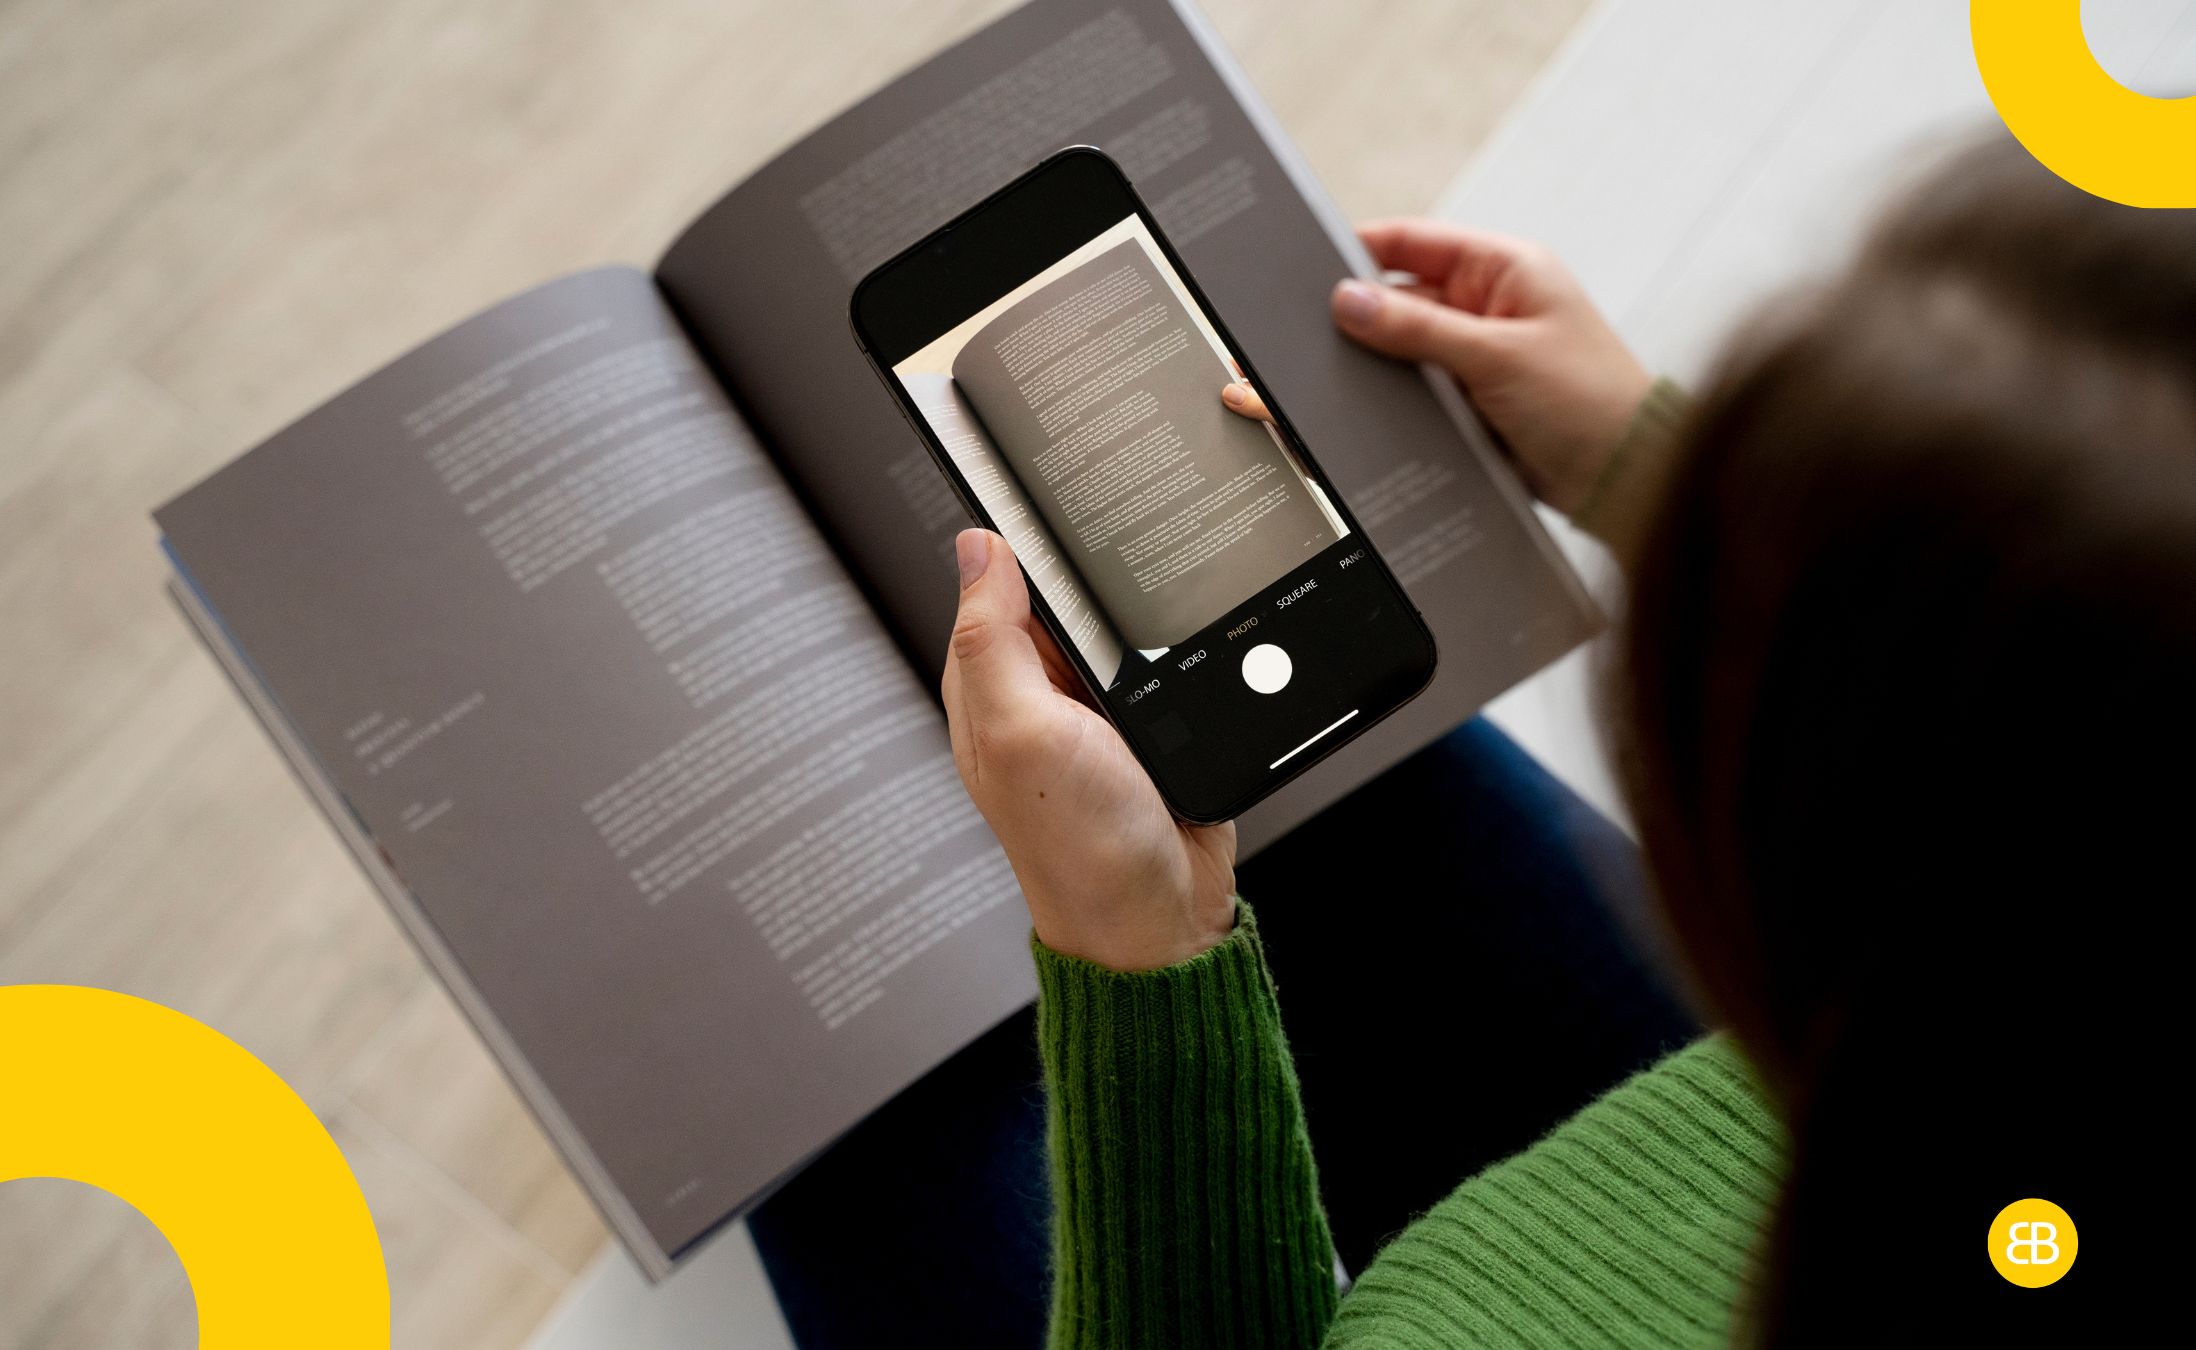 Immerse Yourself in Literature: Top 10 Book and Audiobook Apps in Australia with EB Pearls